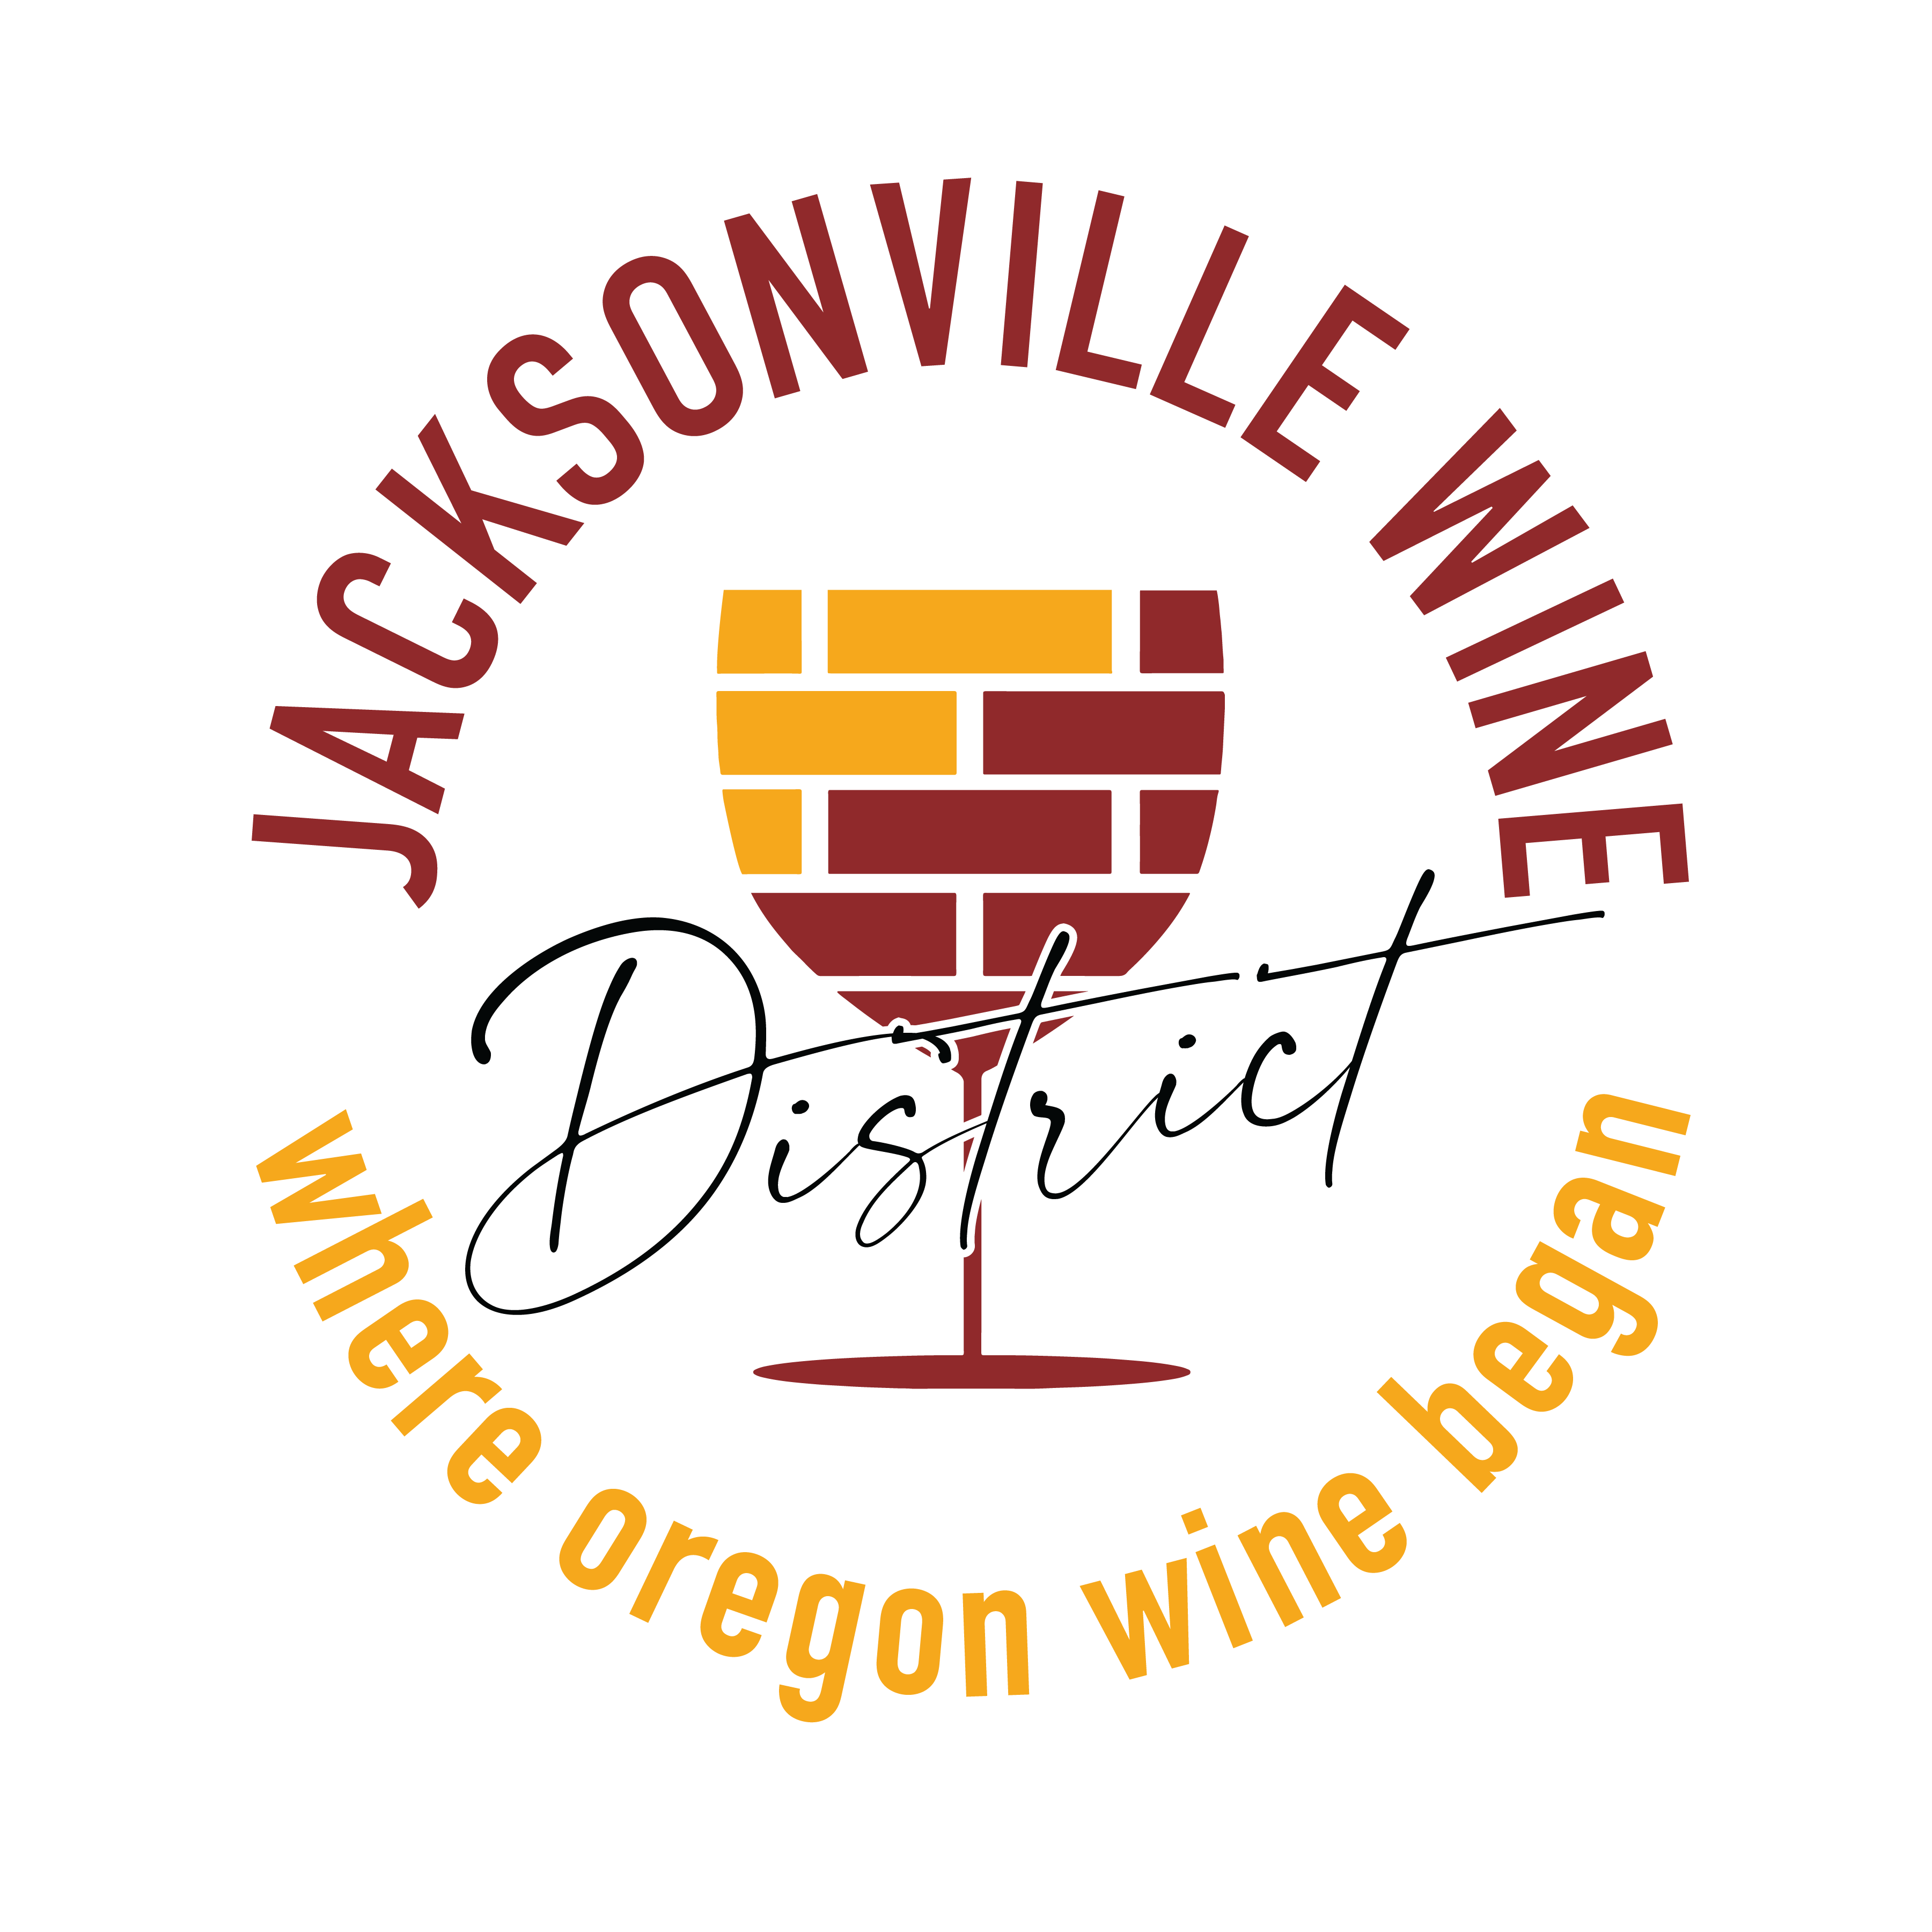 The Wineries of Jacksonville